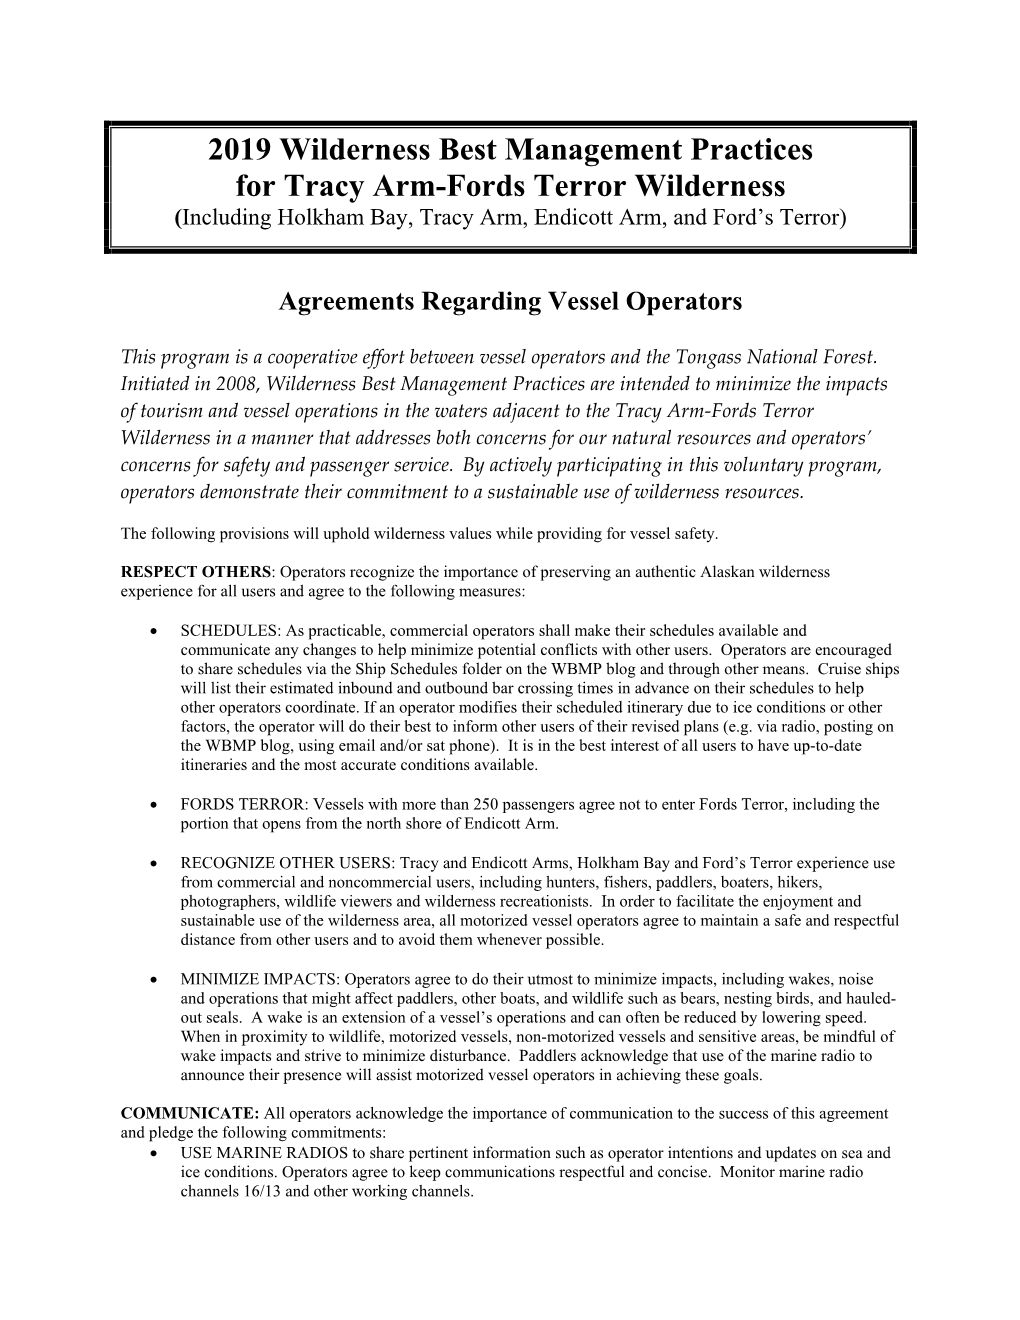 2019 Wilderness Best Management Practices for Tracy Arm-Fords Terror Wilderness (Including Holkham Bay, Tracy Arm, Endicott Arm, and Ford’S Terror)